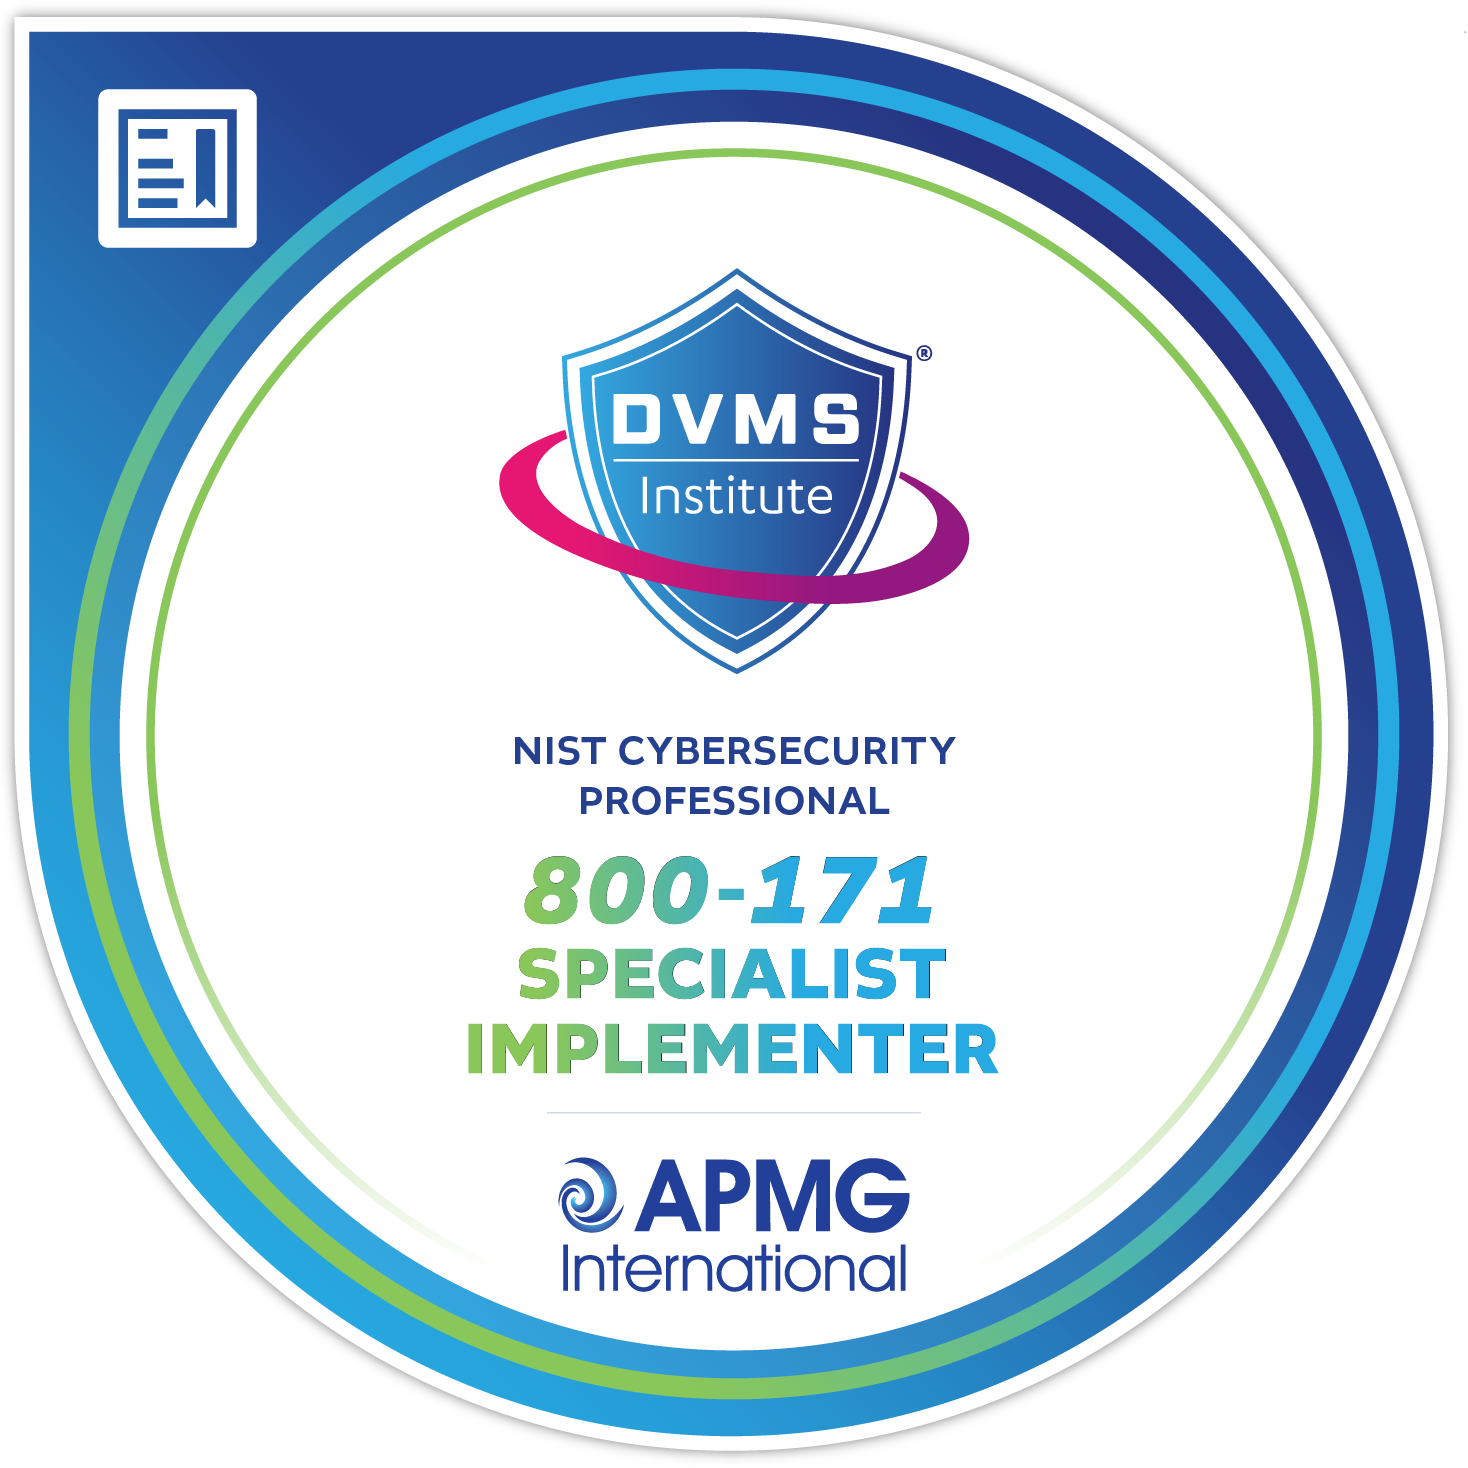 NIST Cybersecurity Professional 800-171 Specialist